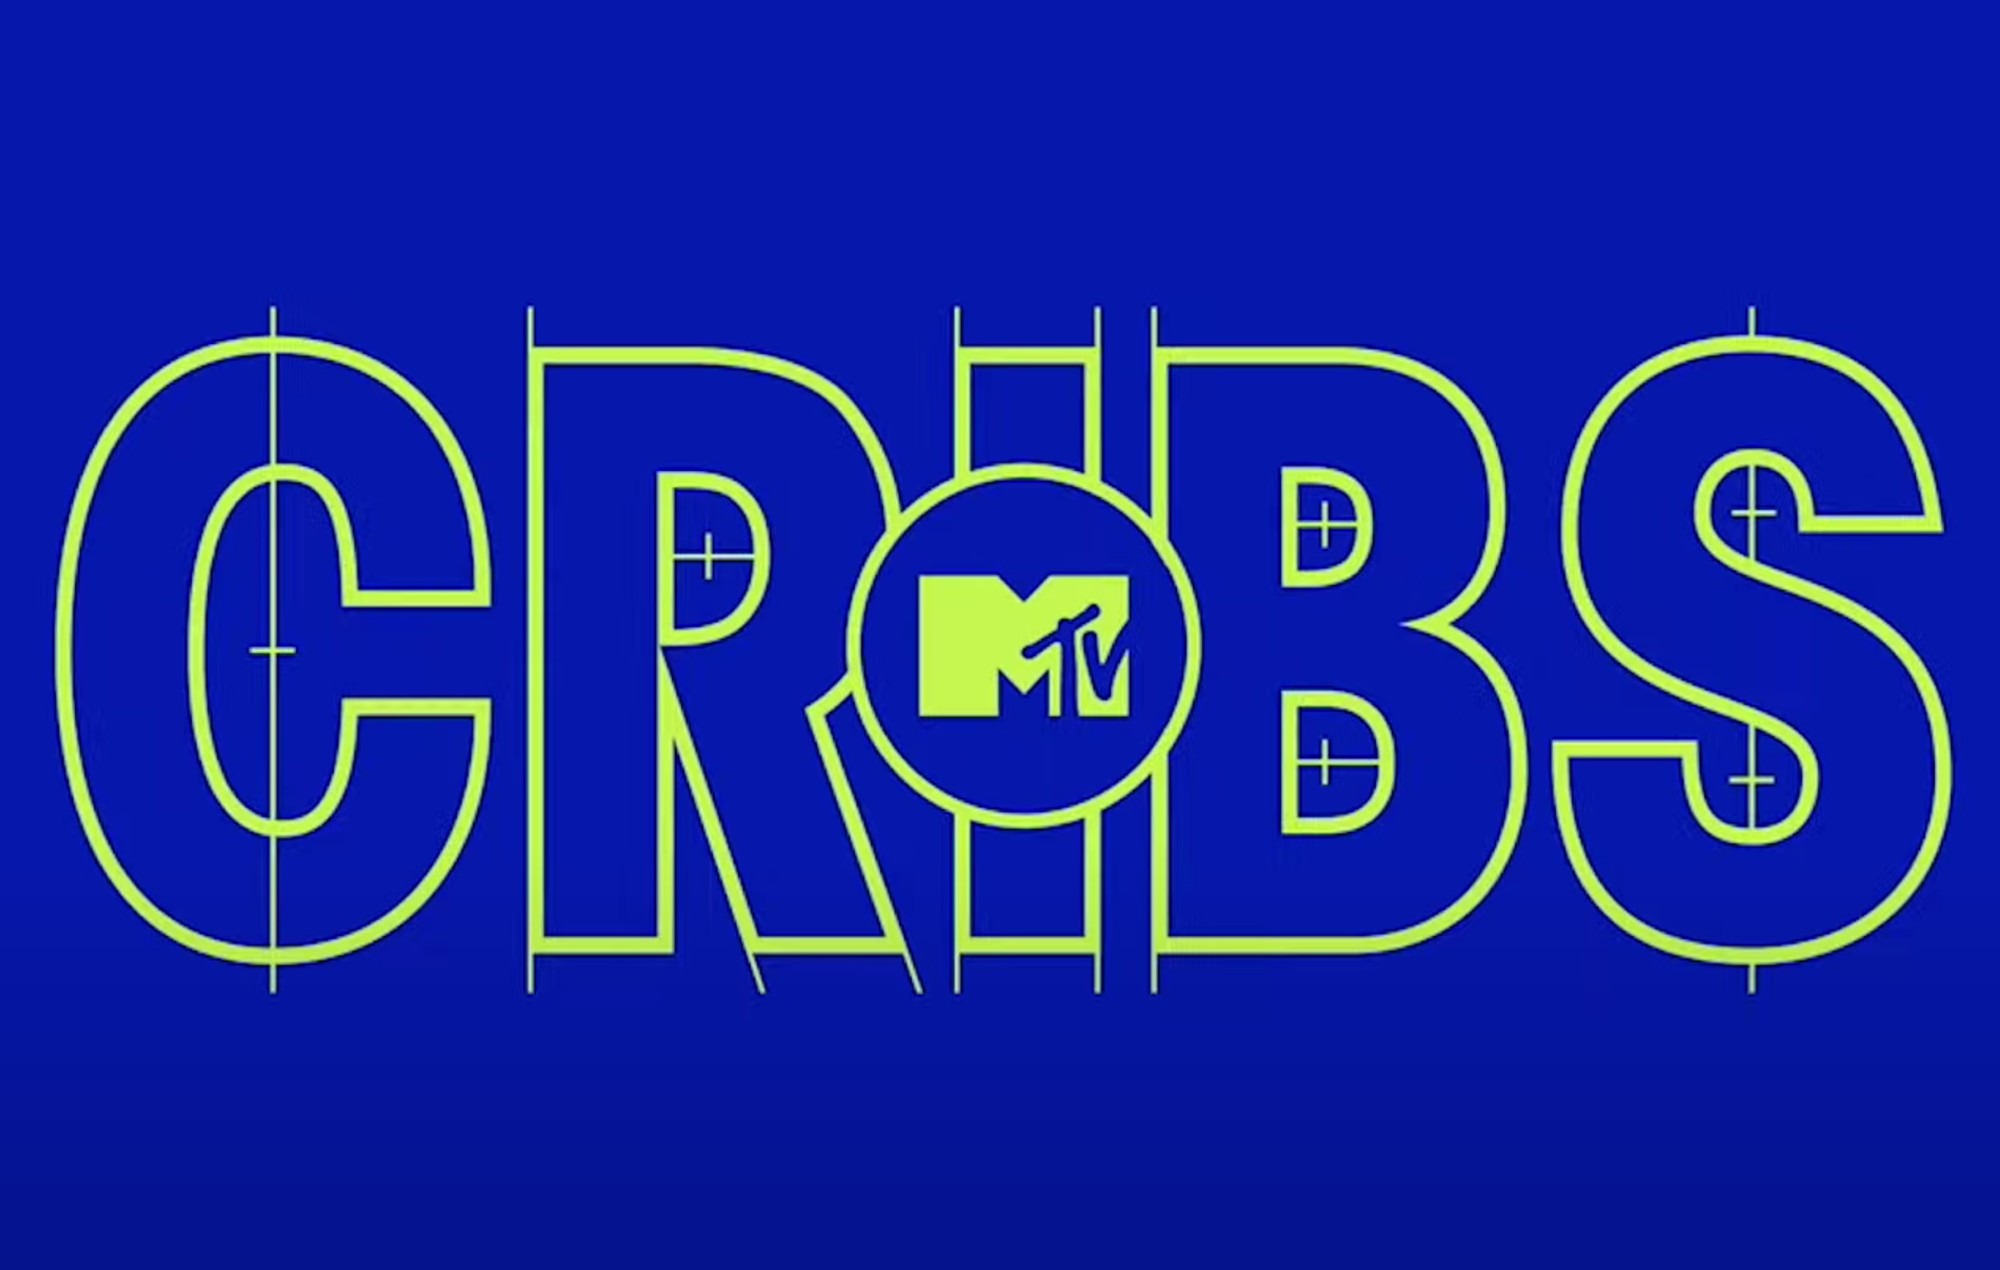 MTV's "Cribs" Returns with Intimate All-Access Celebrity Home Tours on November 15 at 9:30pm ET/PT